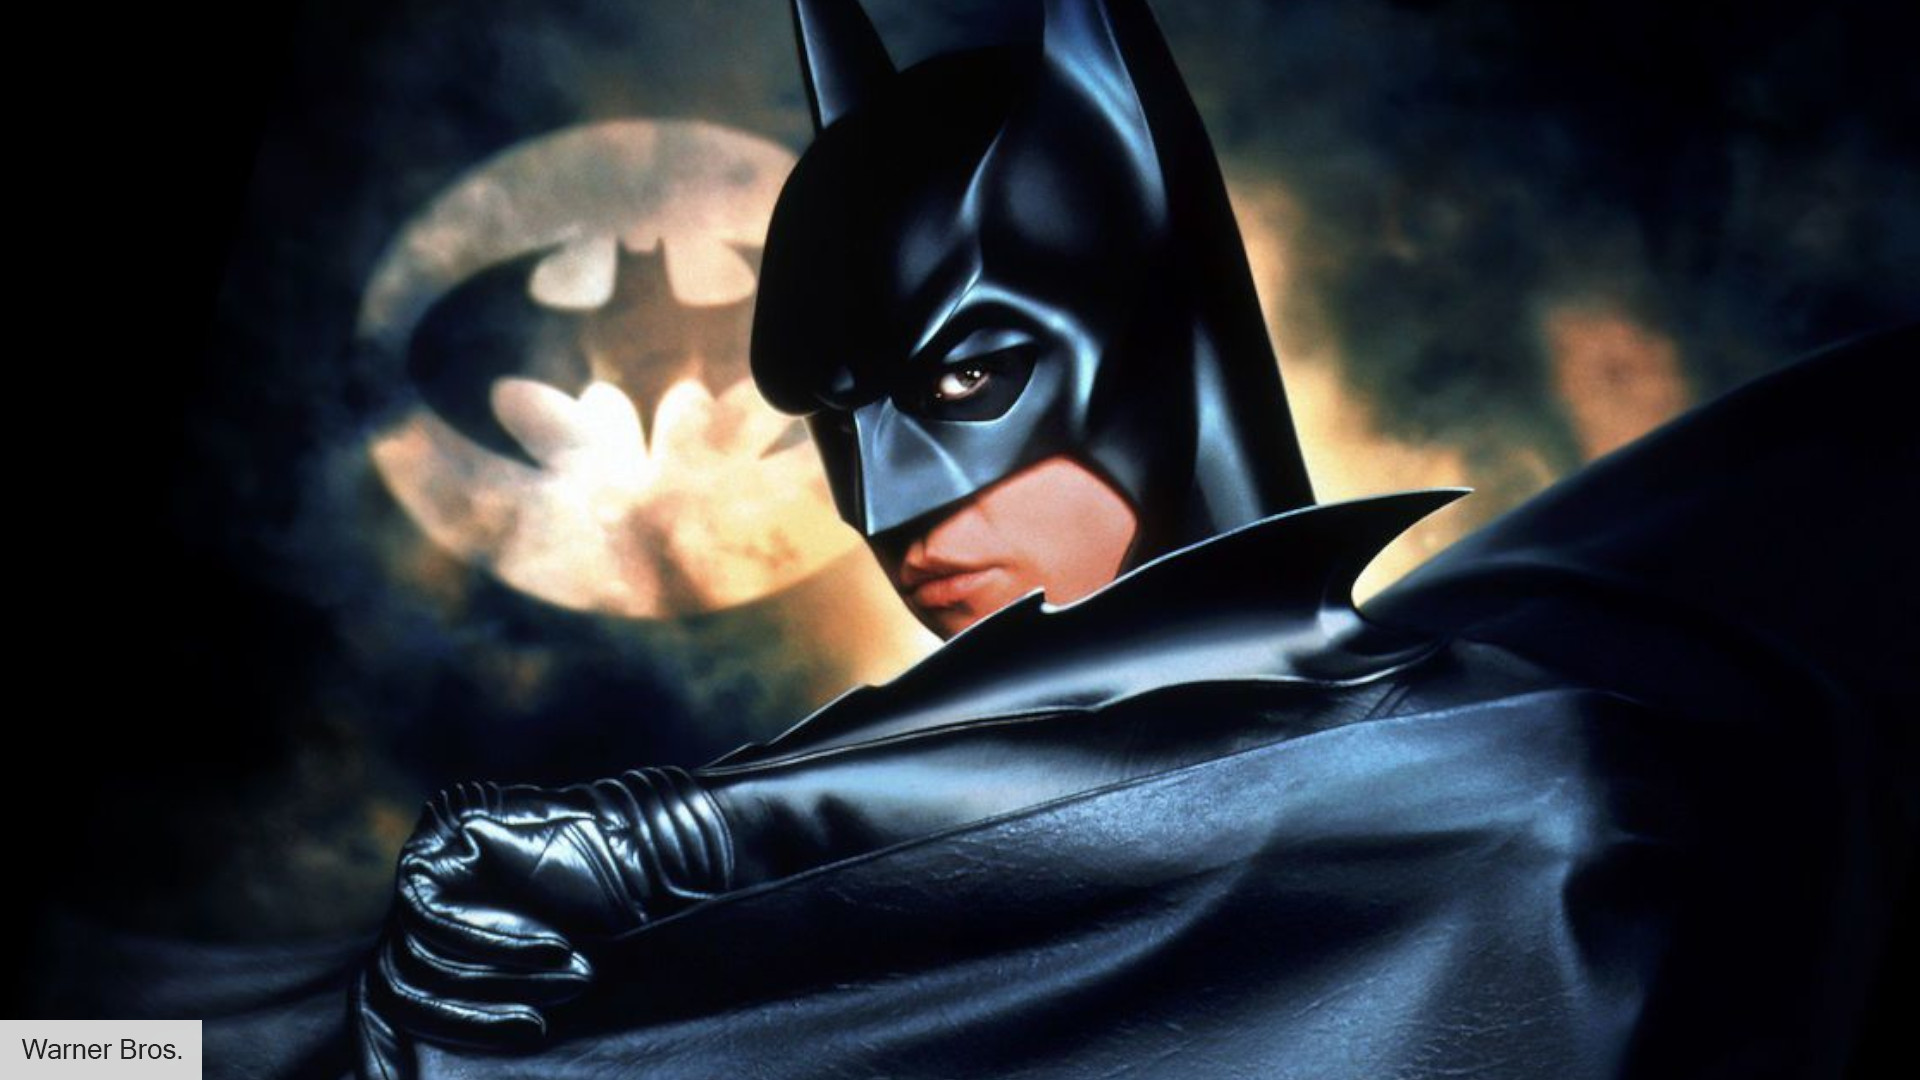 Val Kilmer hated wearing the Batsuit in Batman Forever | The Digital Fix